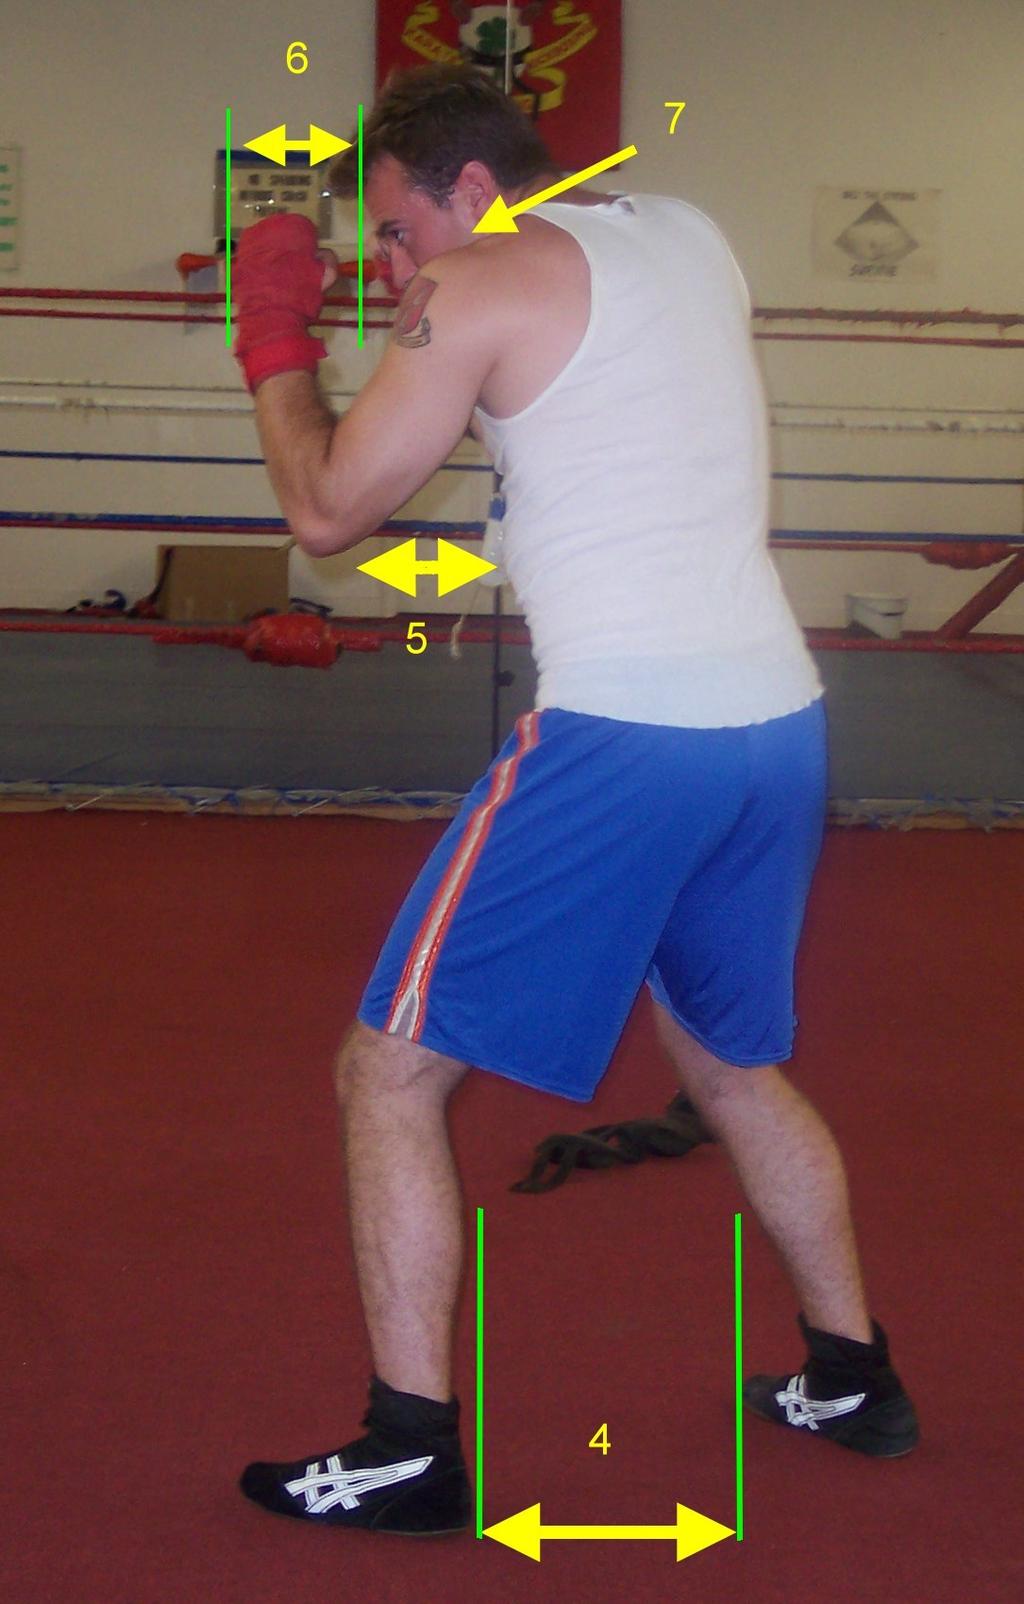 Stance 3 A good stance is very important. With out it, a Boxer has no ability to get out of the way quickly or peruse his opponent. And is unable to deliver Maximum power.